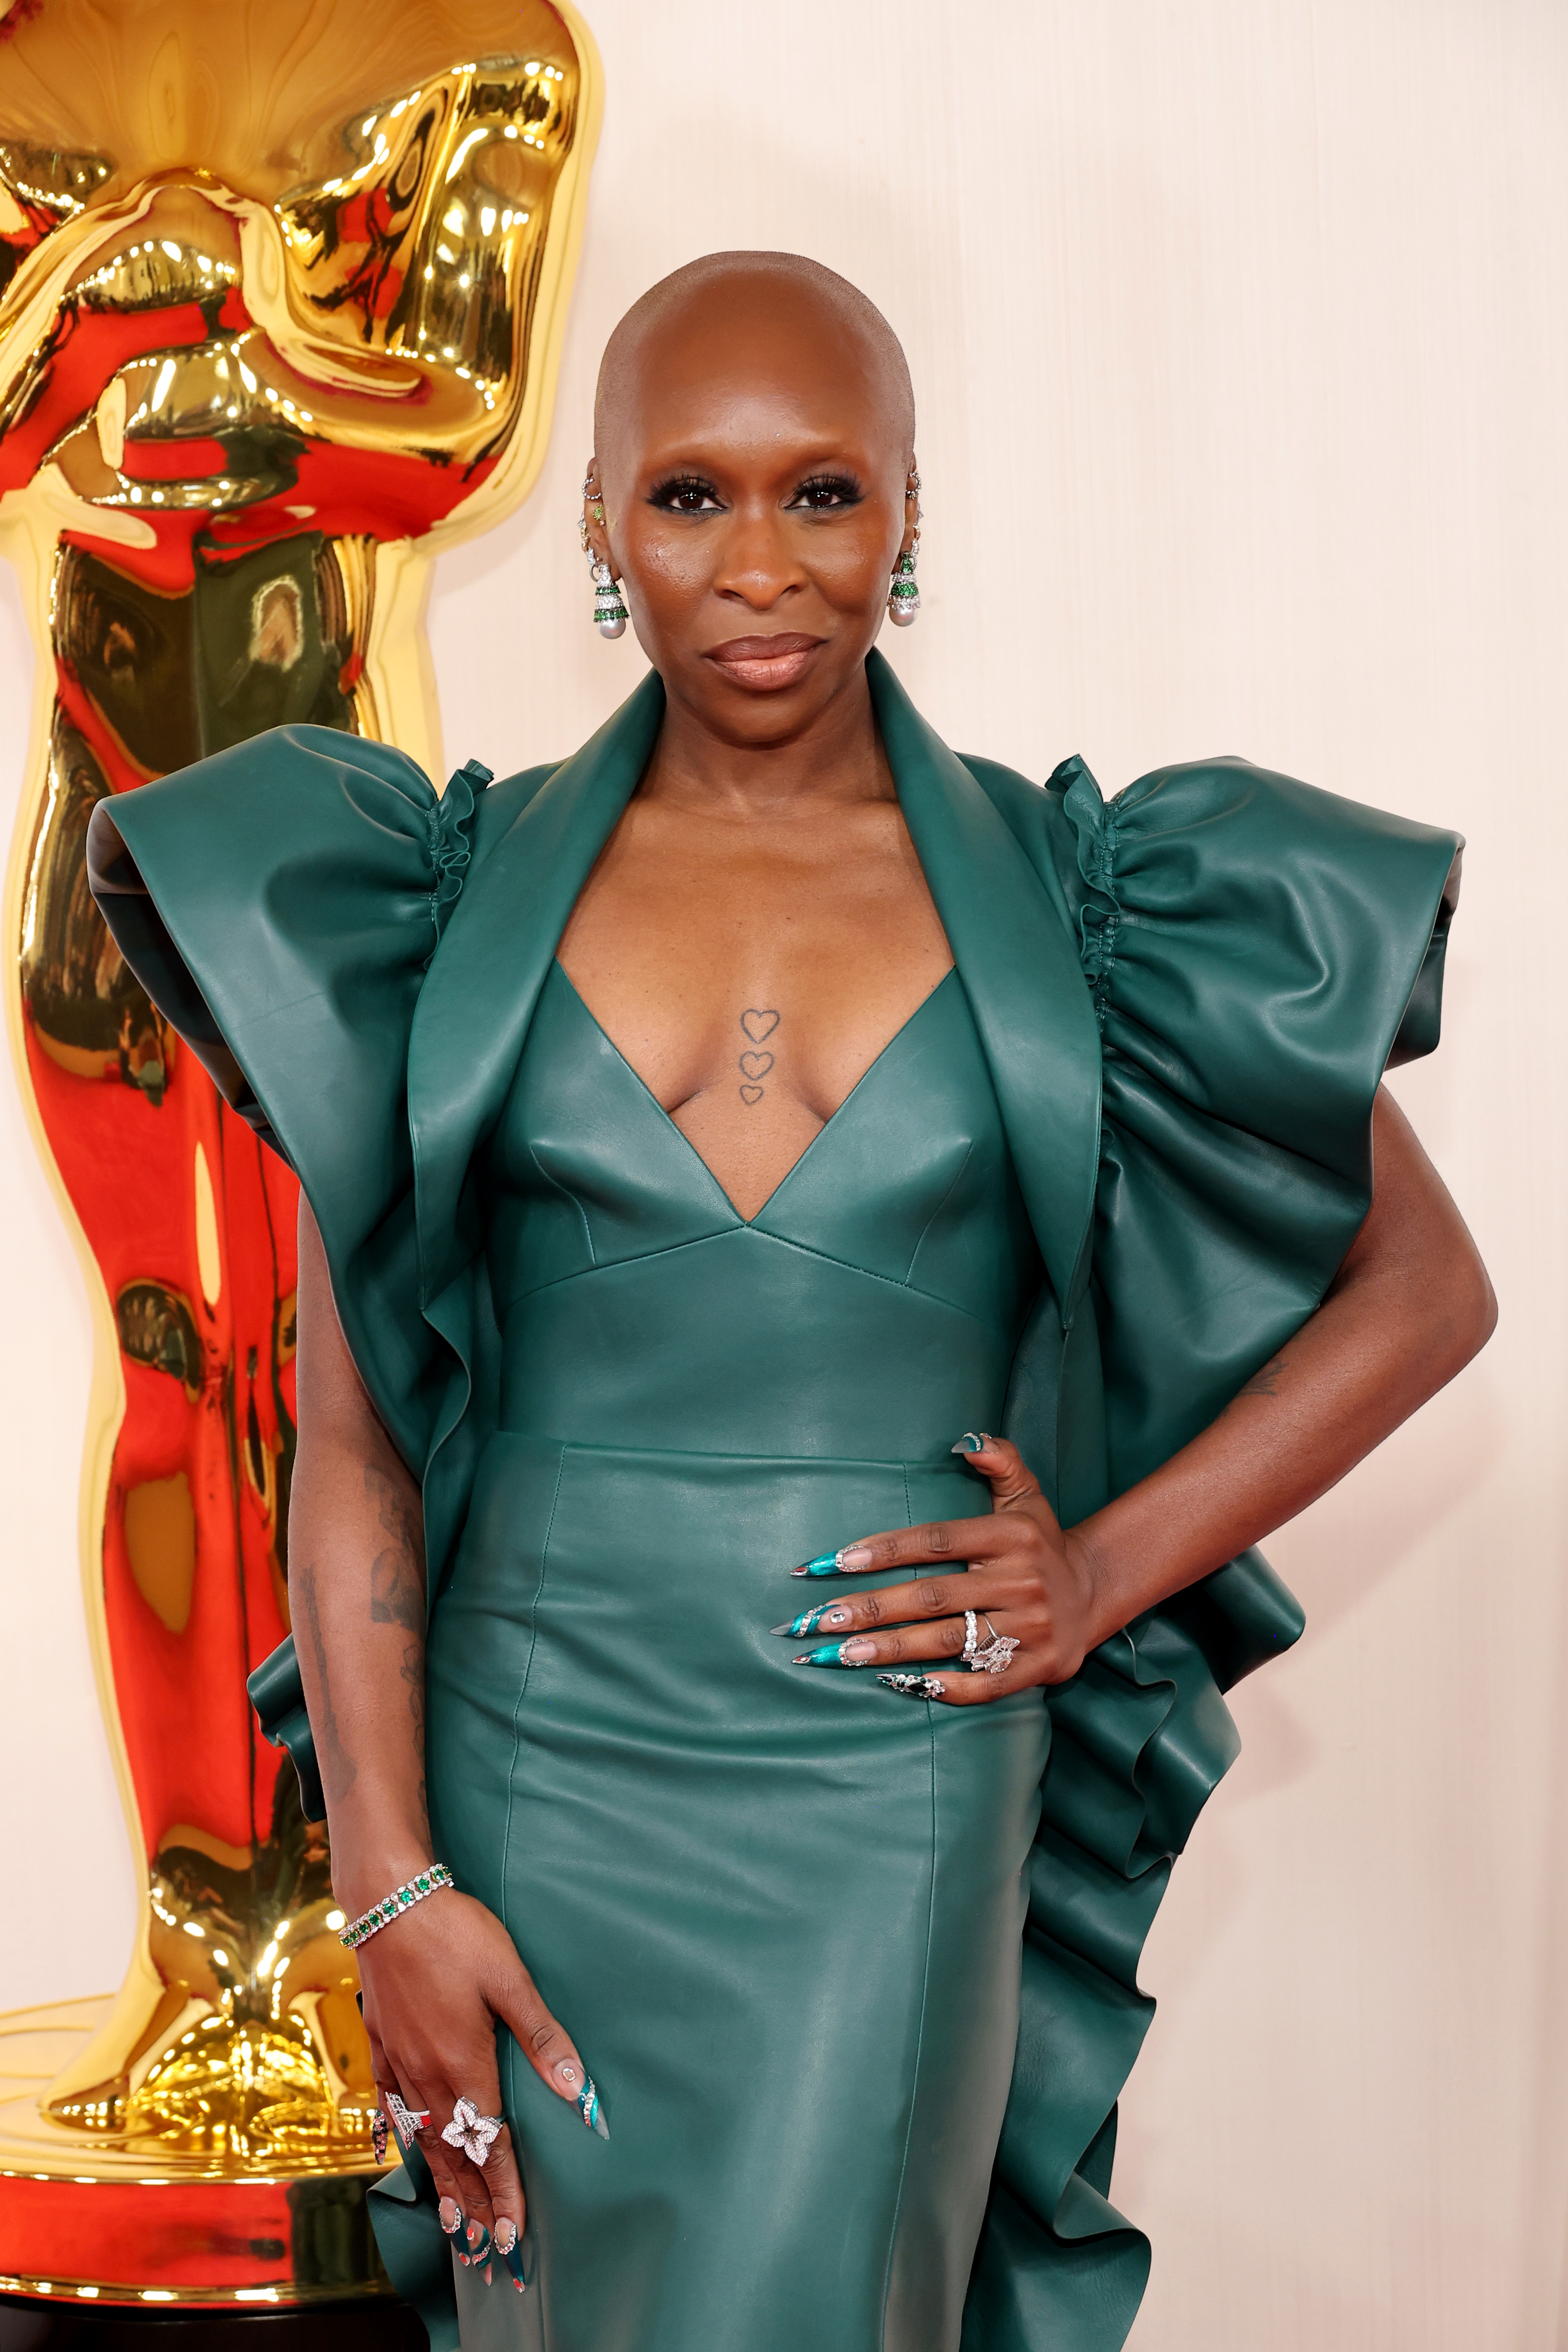 Cynthia posing at an event in an elegant green dress with prominent shoulder detailing and a plunging neckline